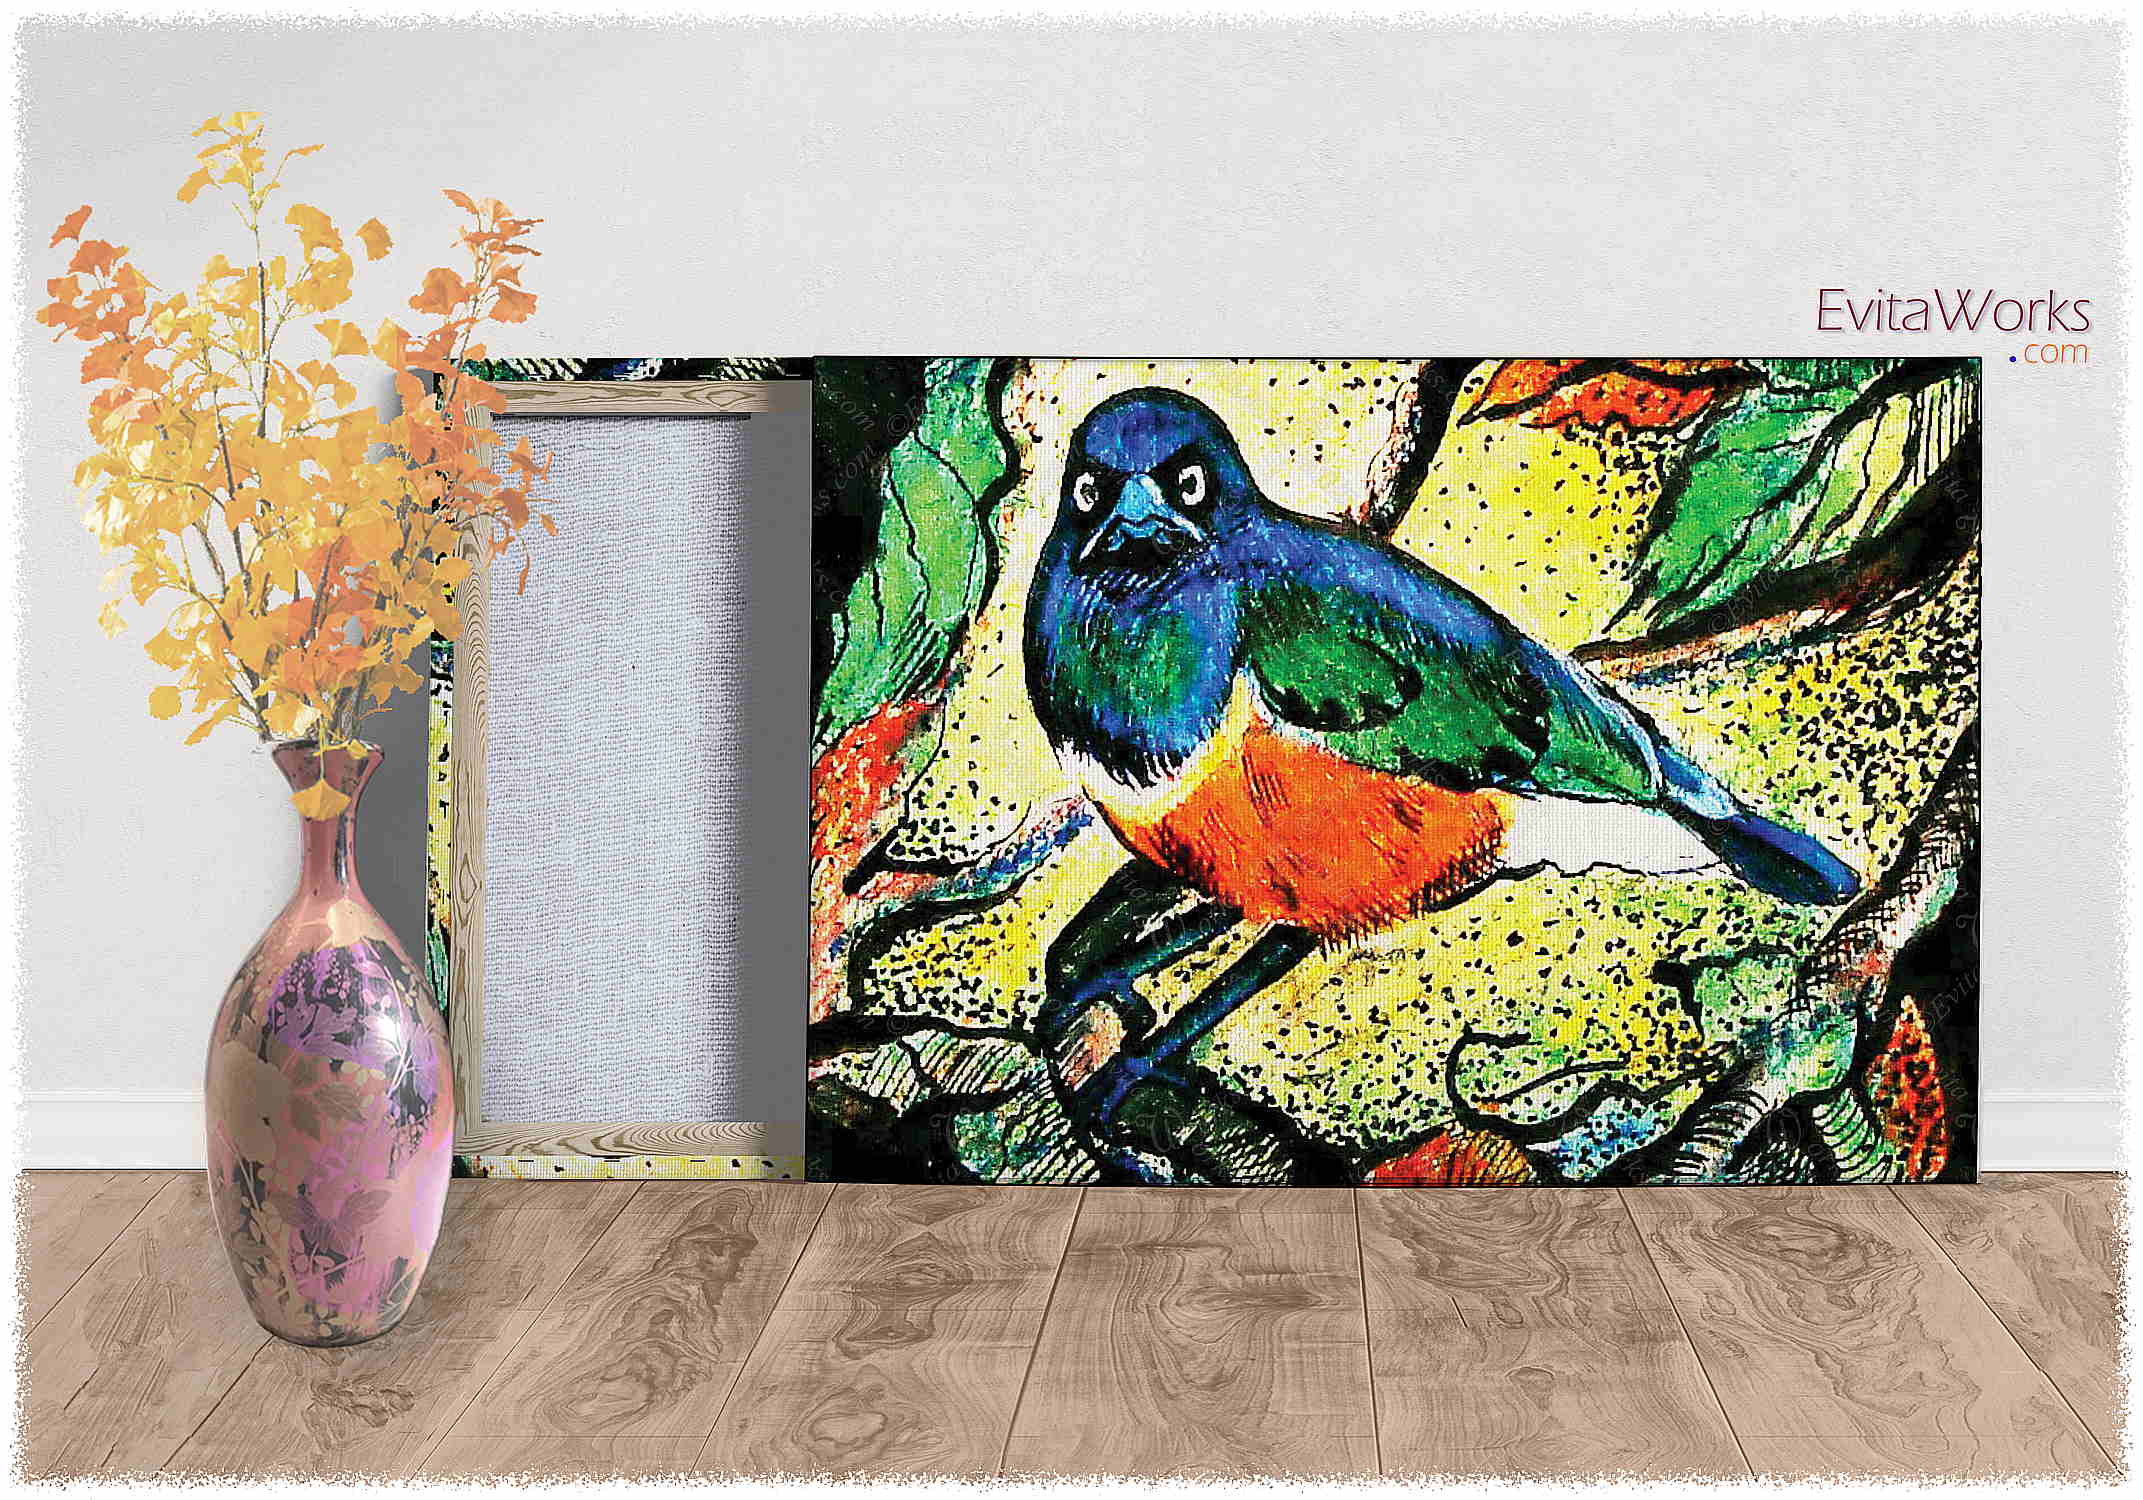 Hit to learn about "Bird in nature illustration 05" on canvases